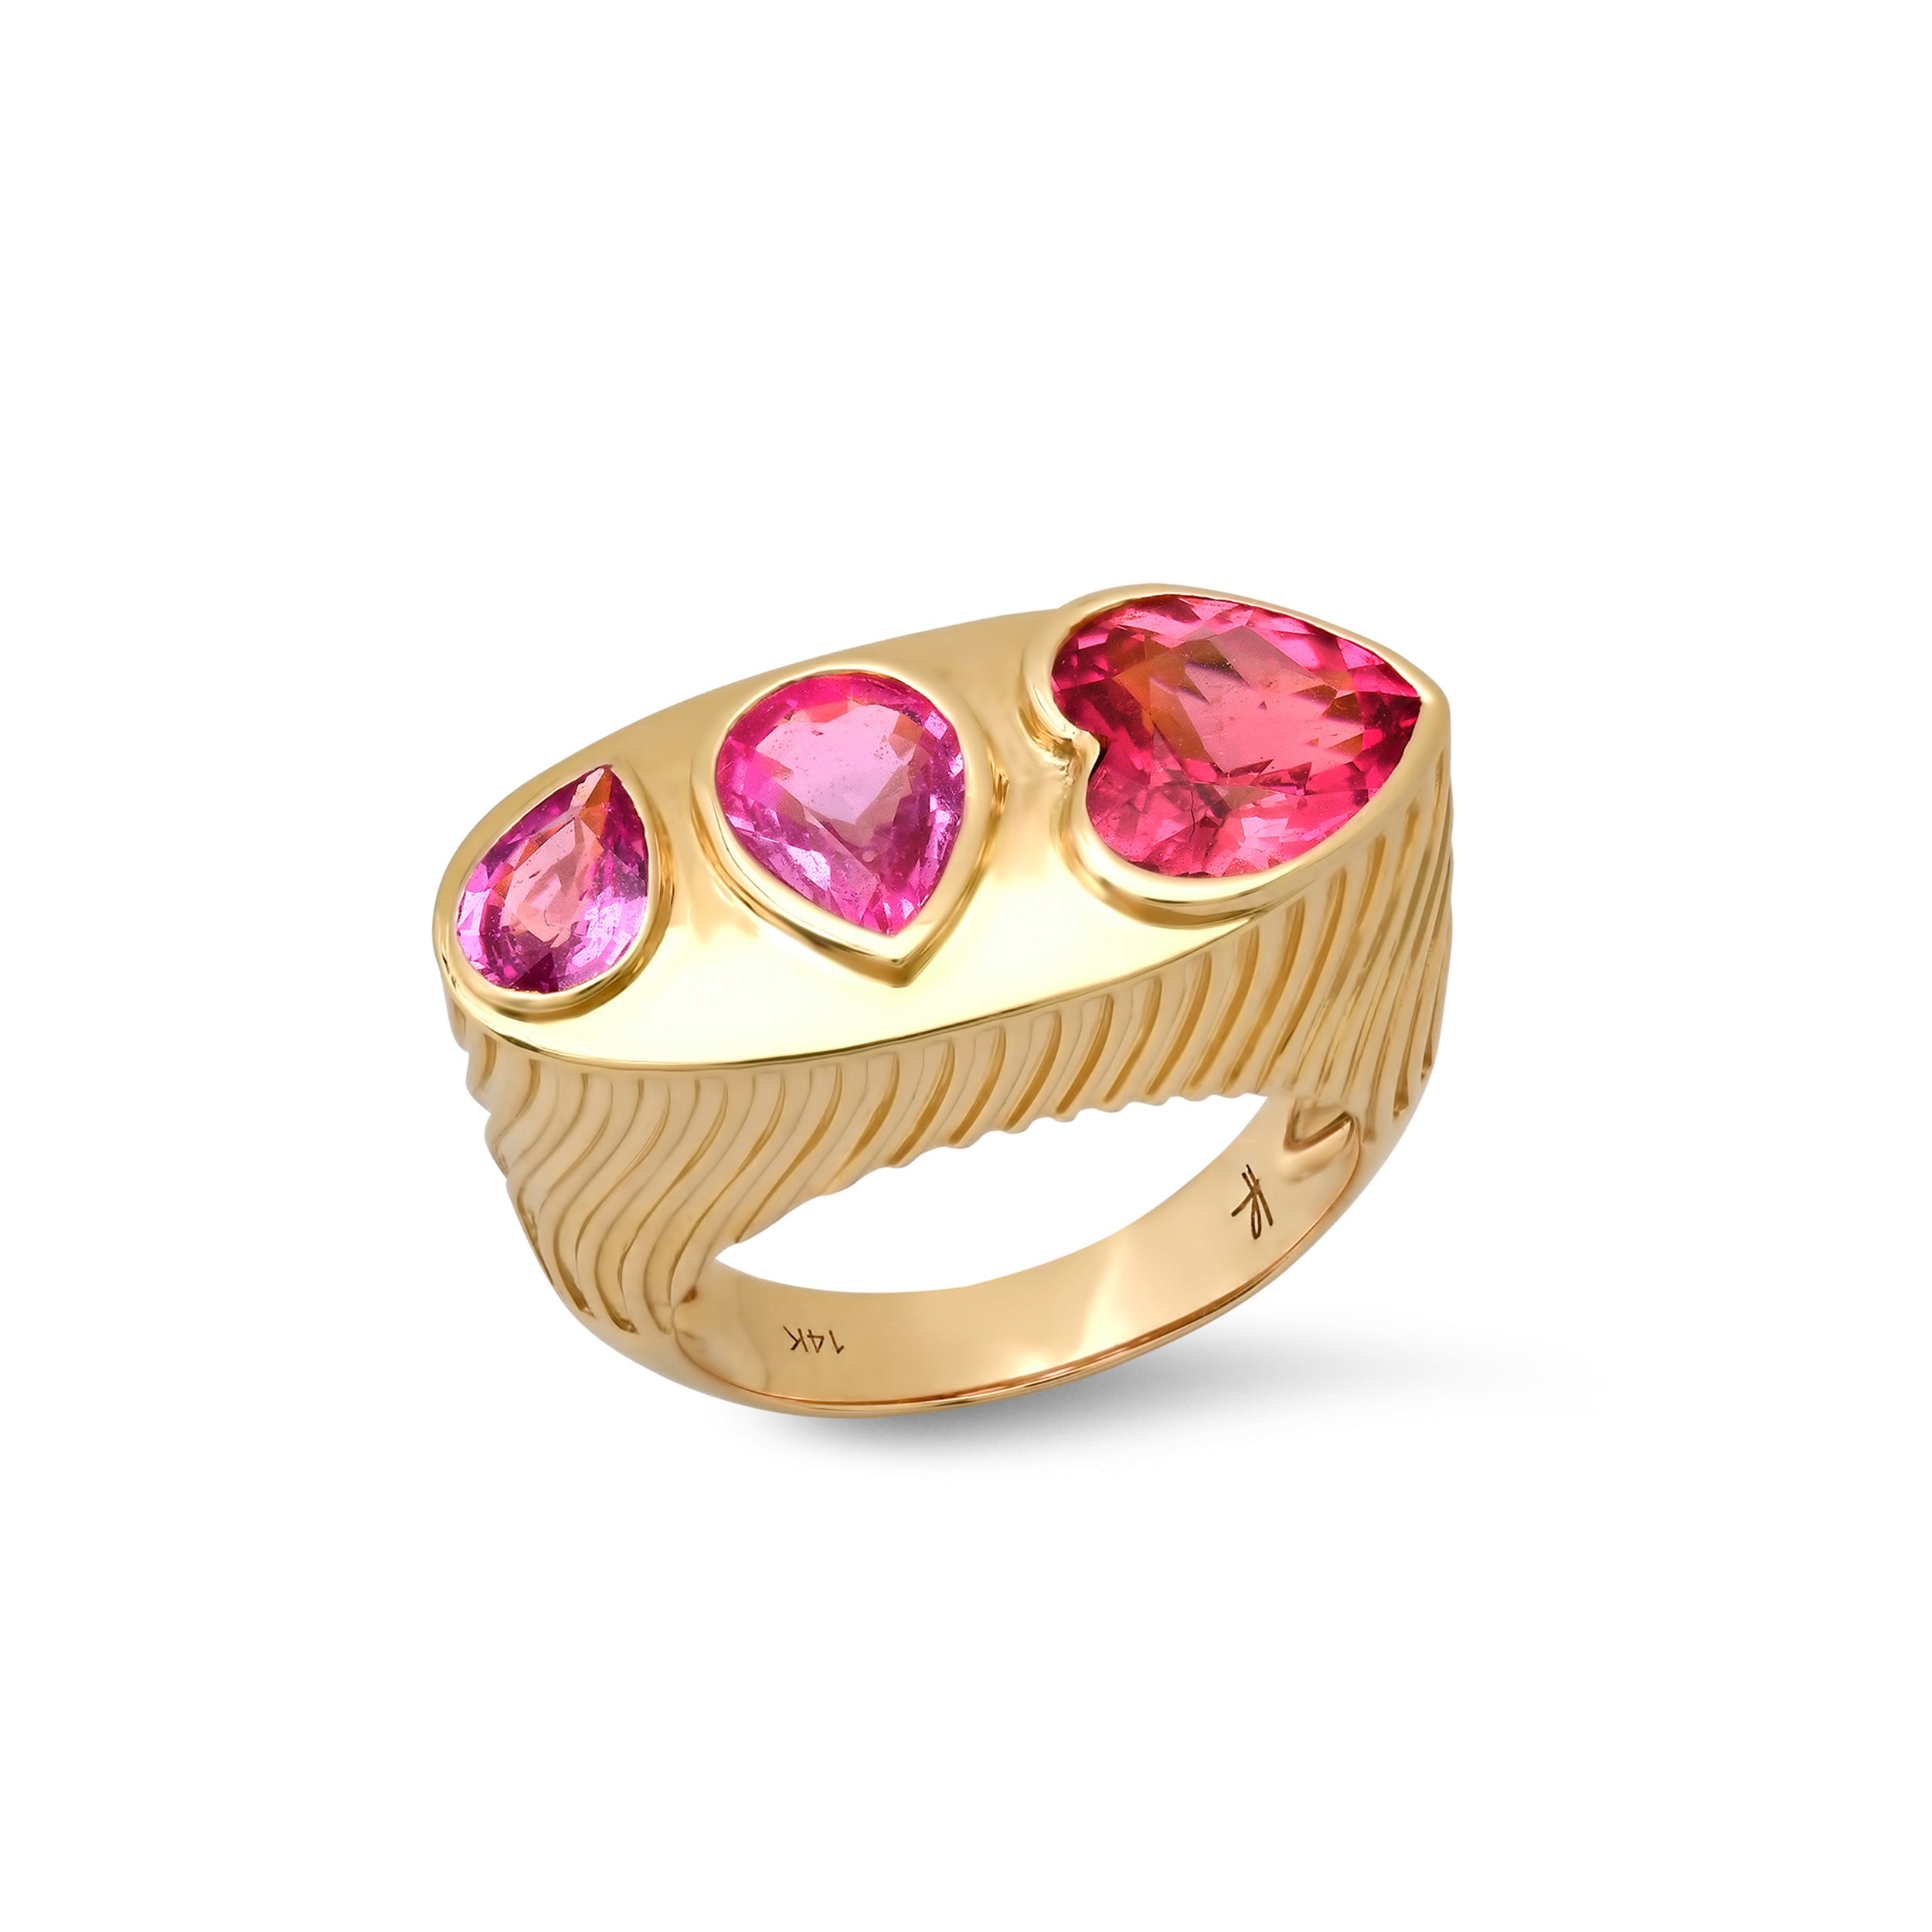 Ripple Ring in Tourmaline and Pink Sapphire